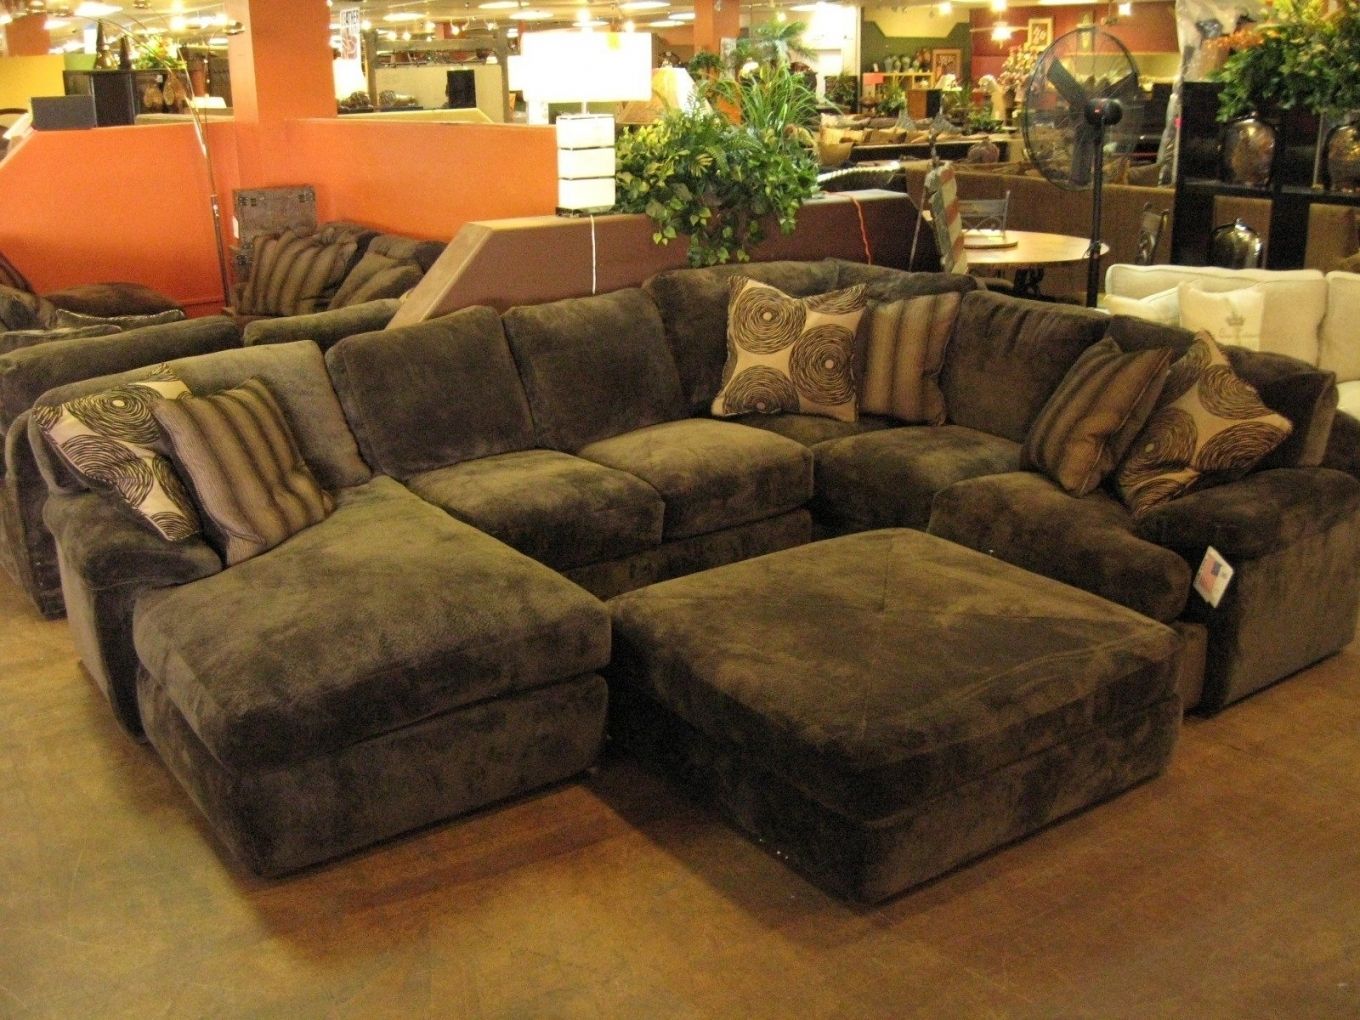 Best Comfy Sectional Sofas 18 For Your Sofas And Couches Ideas With With Regard To Las Vegas Sectional Sofas 